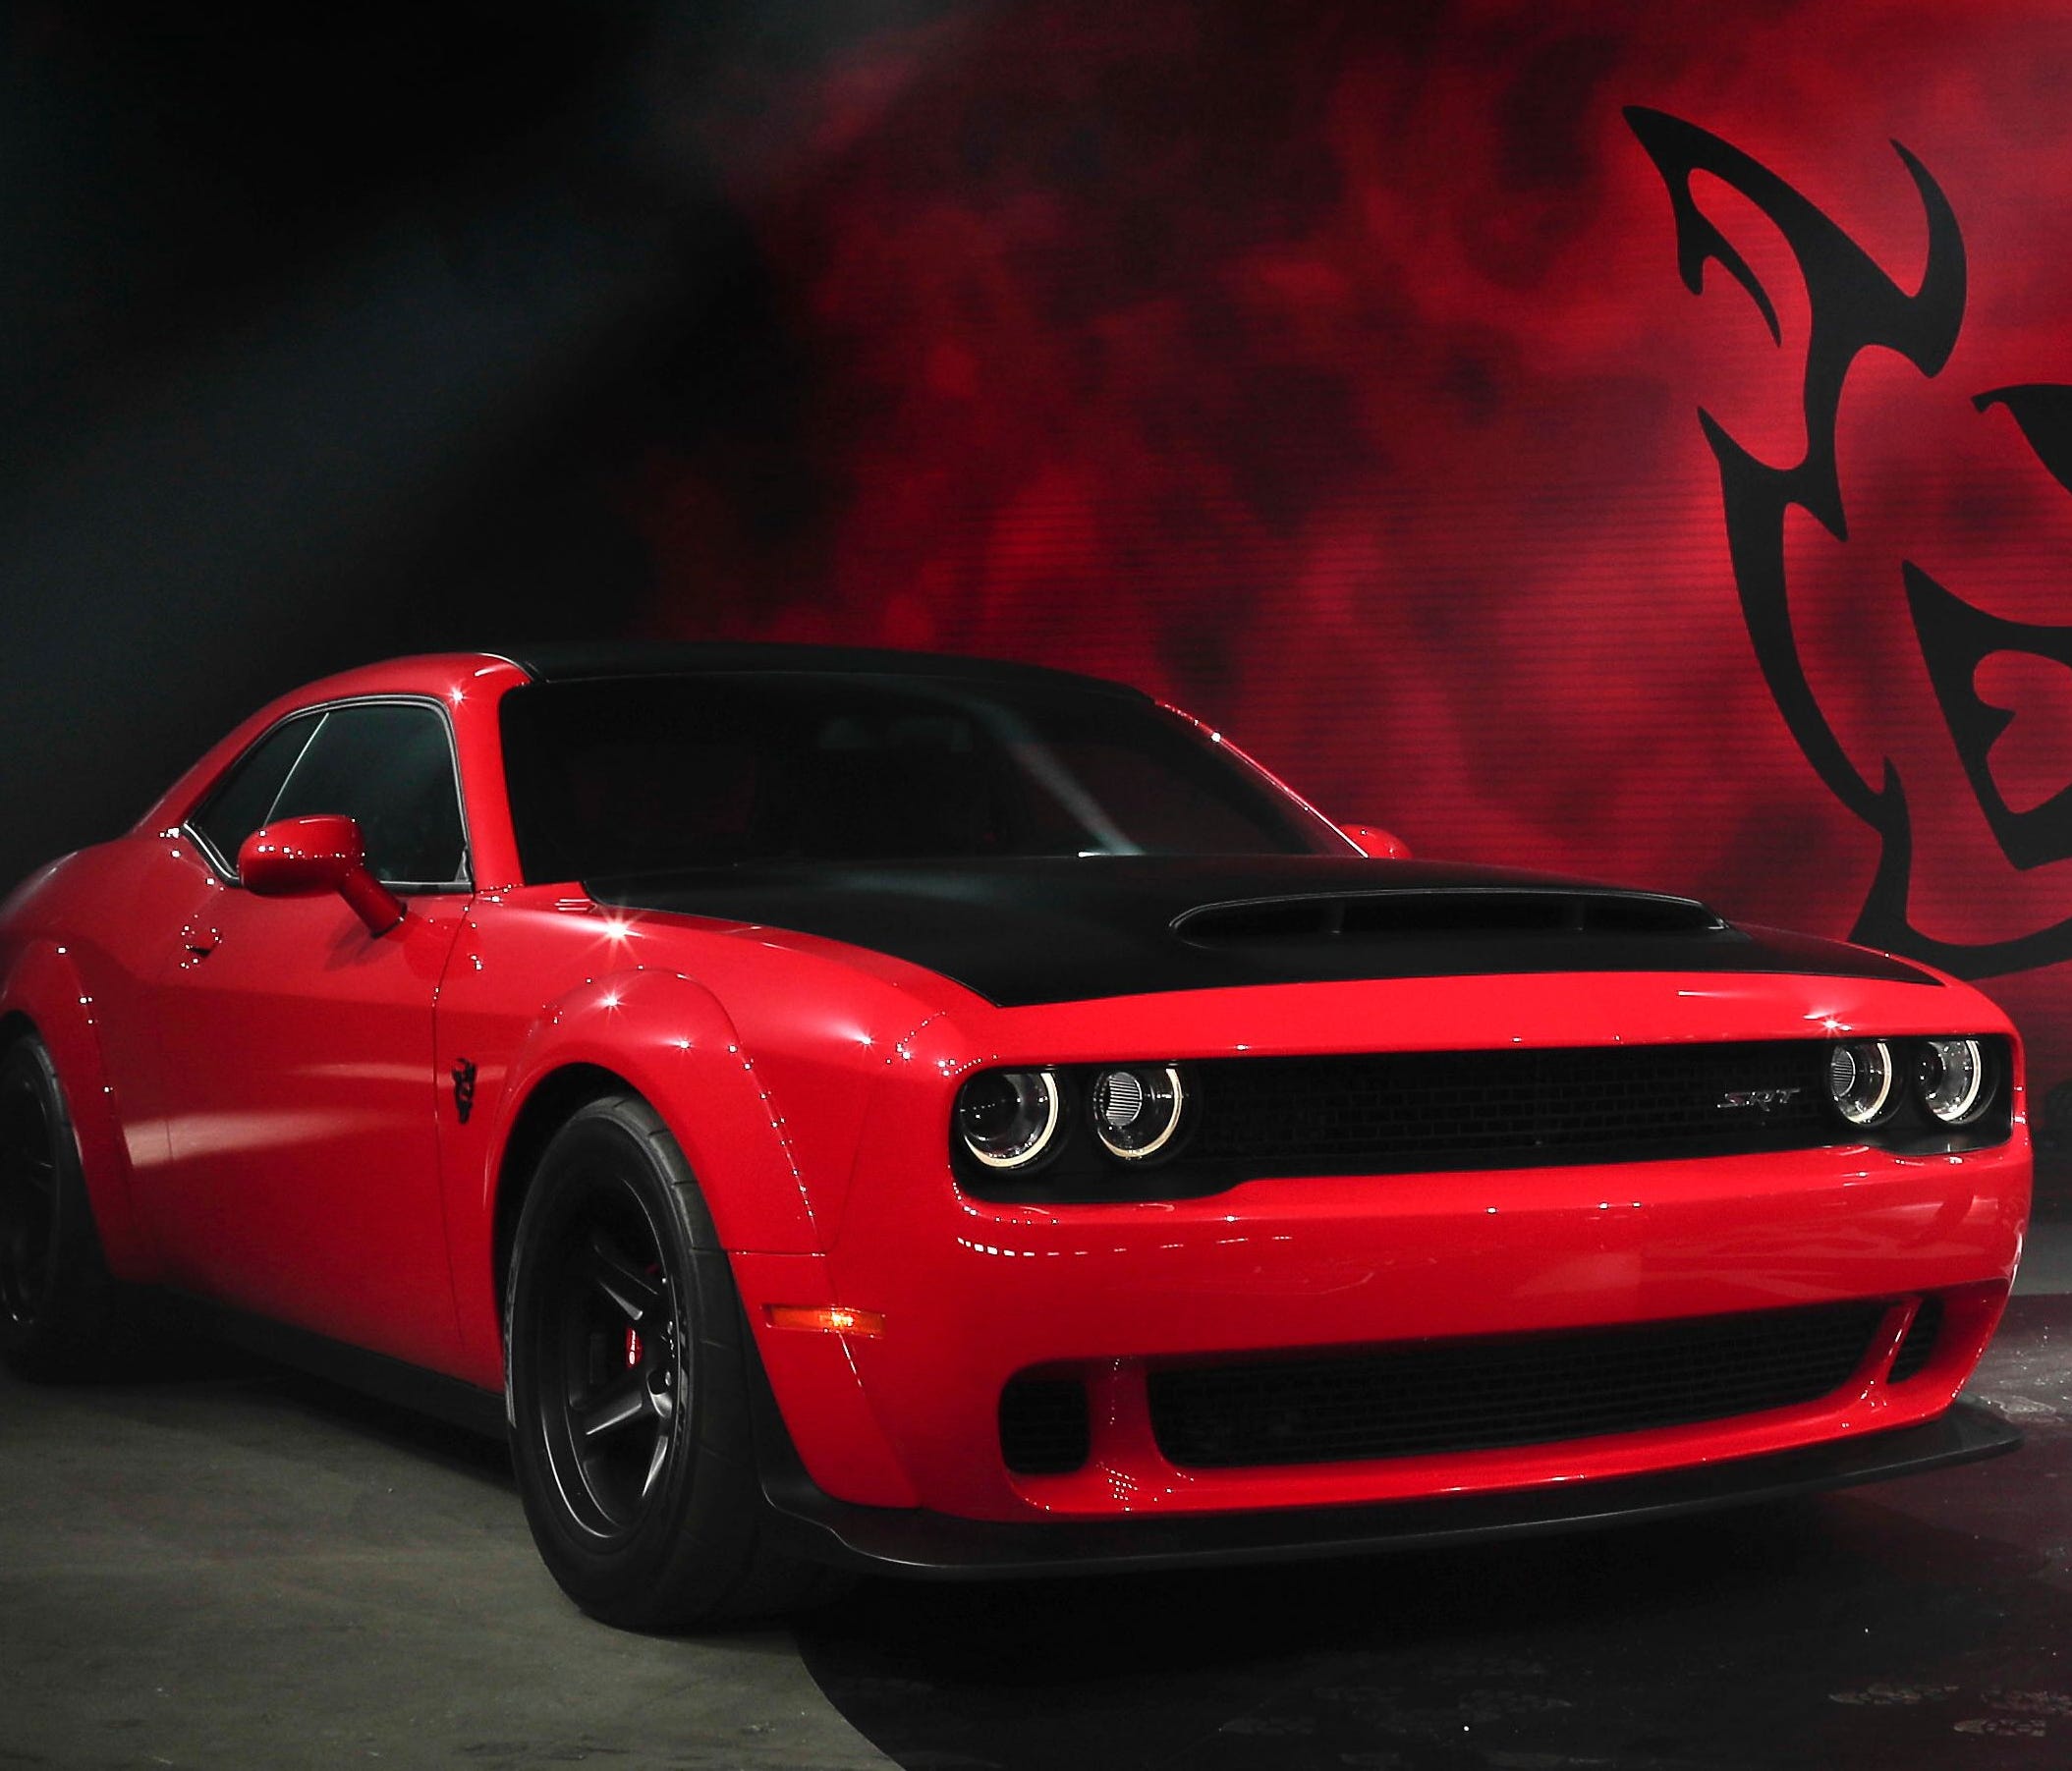 The 2018 Dodge Challenger SRT Demon during a media preview for the New York International Auto Show in New York. This limited-edition variant boasts a maximum 840 horsepower and various modifications to improve straight-line acceleration.